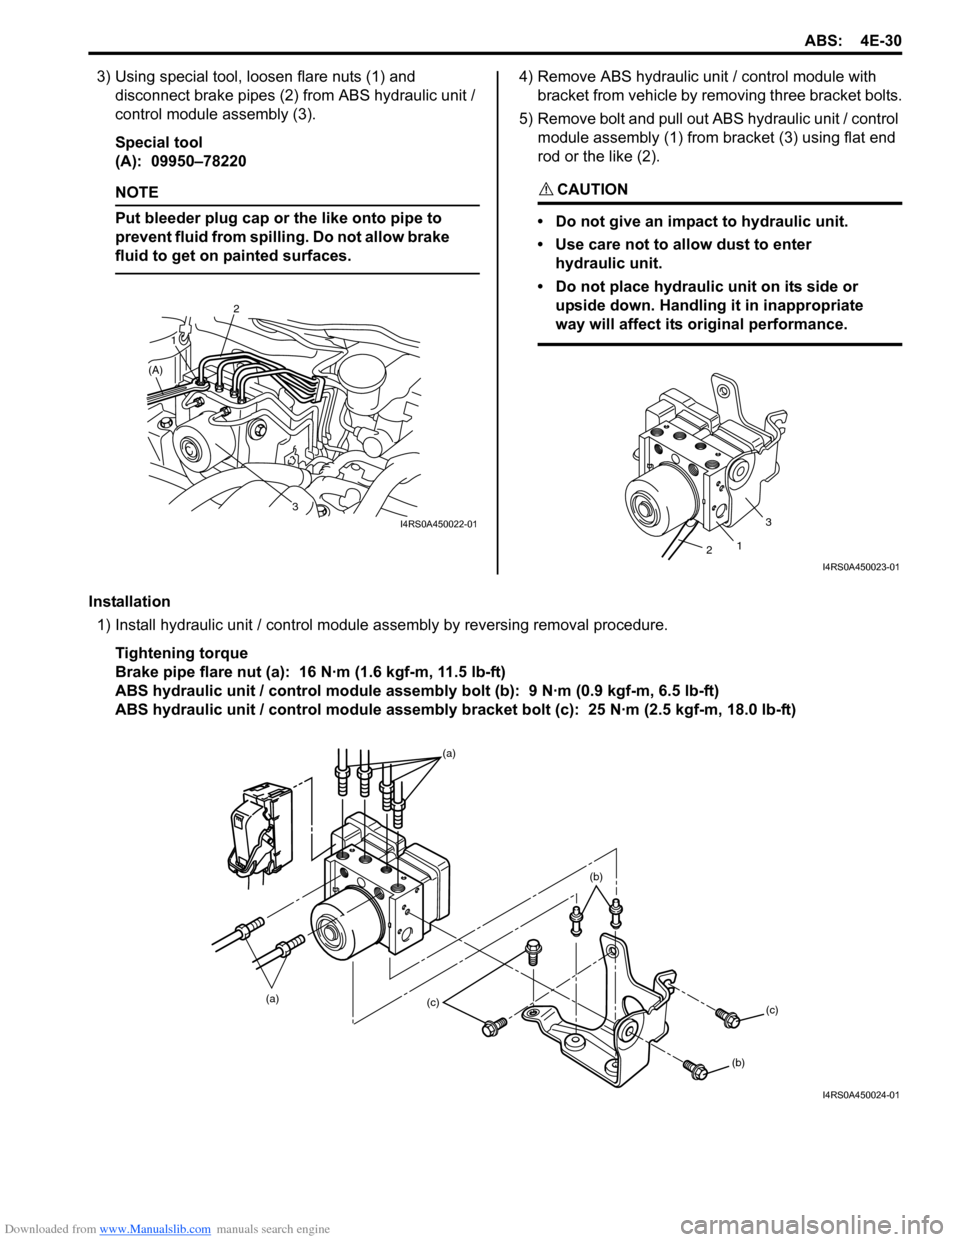 SUZUKI SWIFT 2006 2.G Service Owners Guide Downloaded from www.Manualslib.com manuals search engine ABS: 4E-30
3) Using special tool, loosen flare nuts (1) and disconnect brake pipes (2) from ABS hydraulic unit / 
control module assembly (3).
